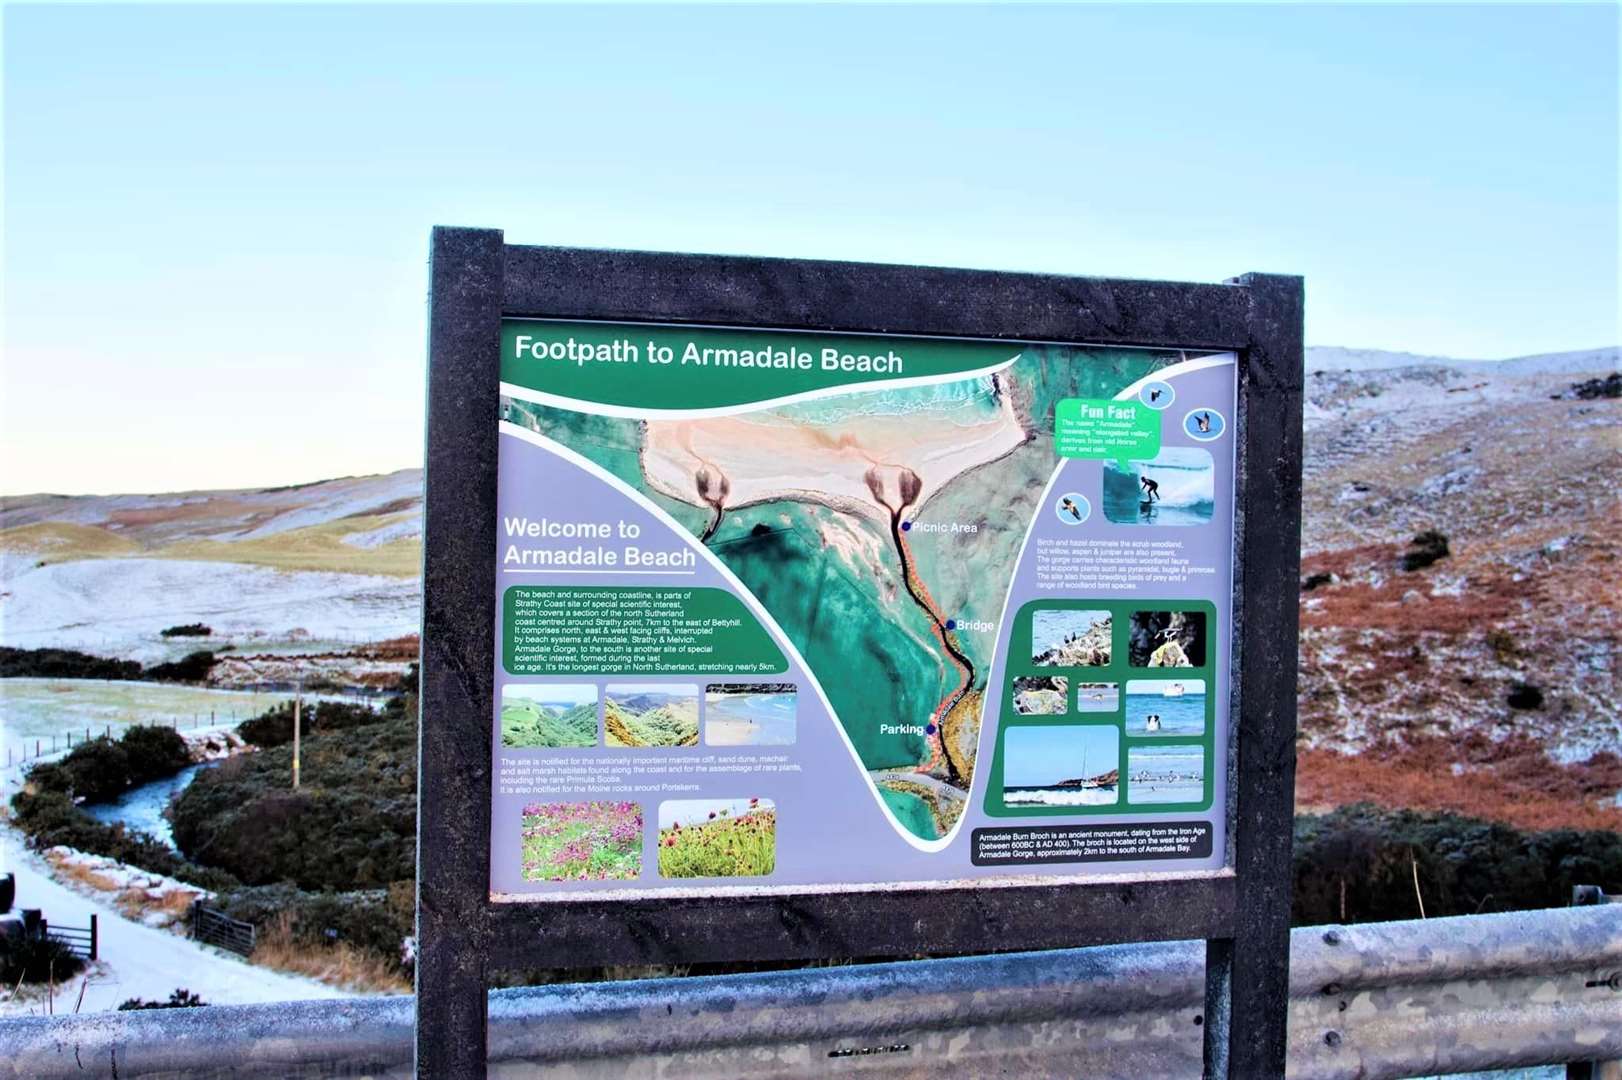 A new information board at Armadale beach.